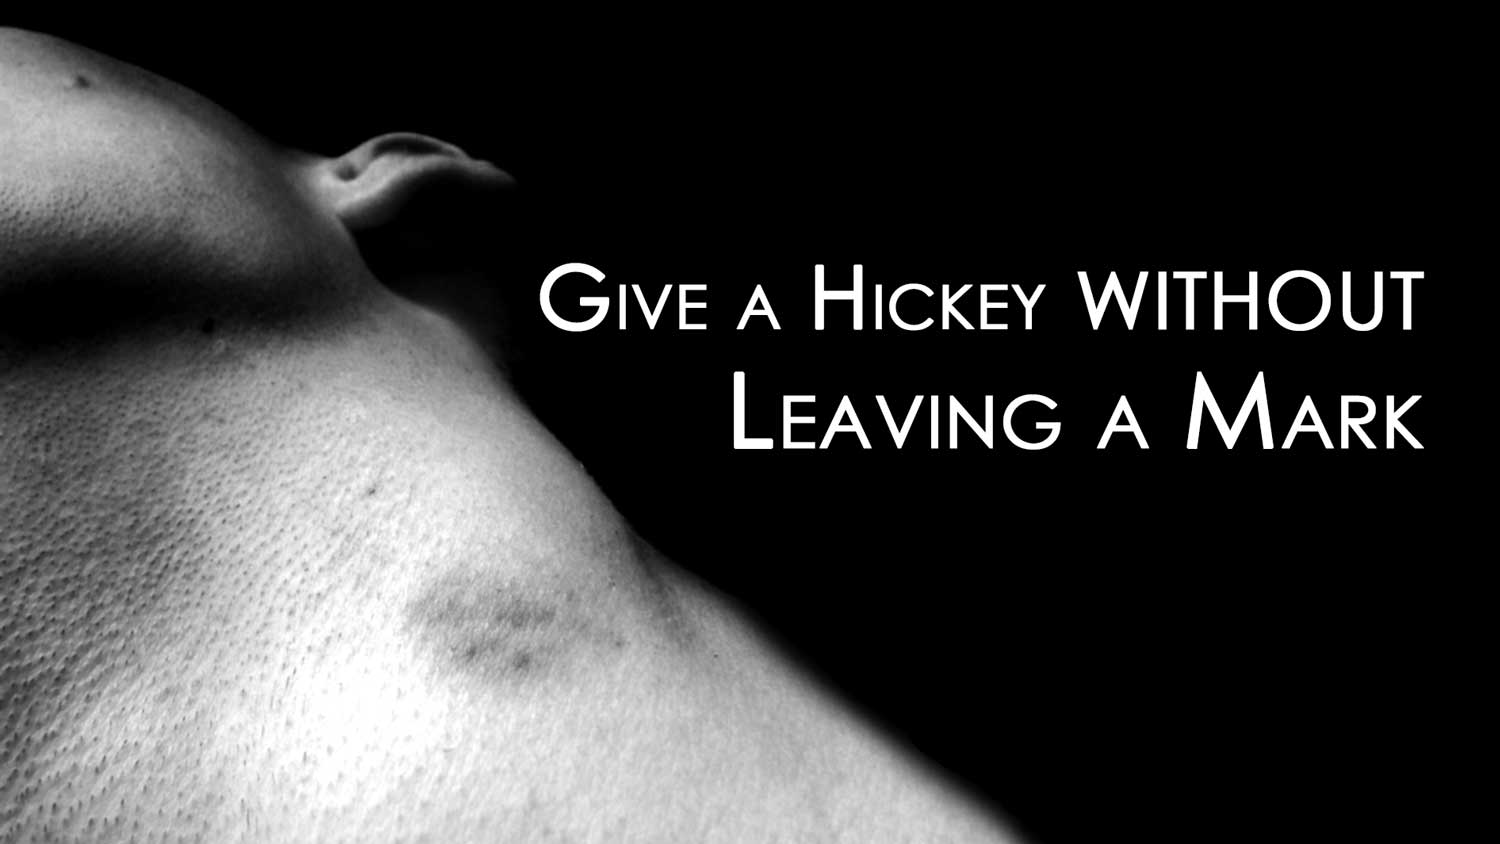 How to give a hickey without leaving a mark – 5 easy tips